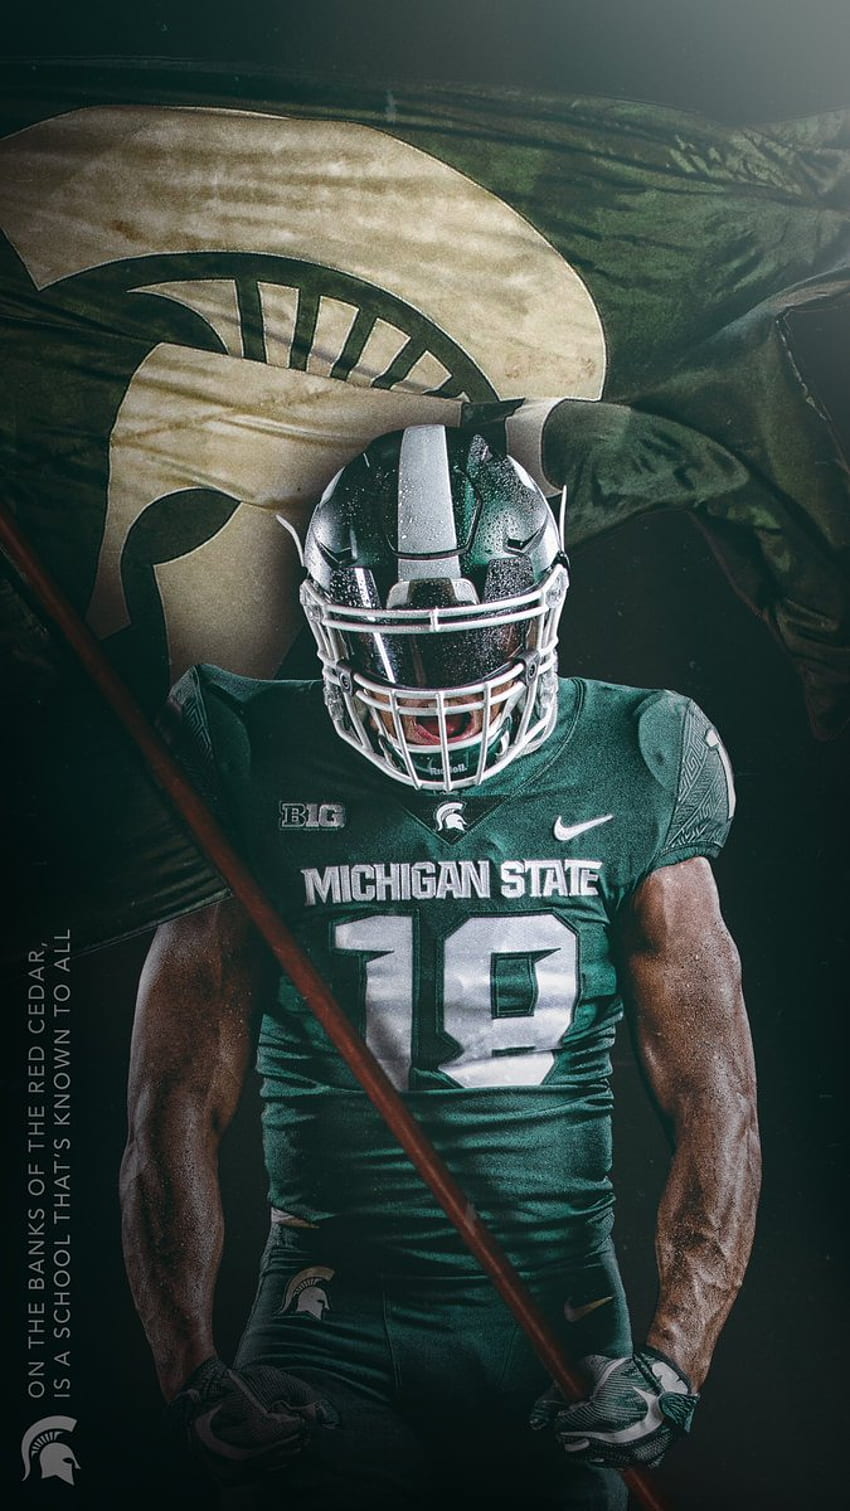 2019 Michigan State Spartans Football Schedule Downloadable Wallpaper